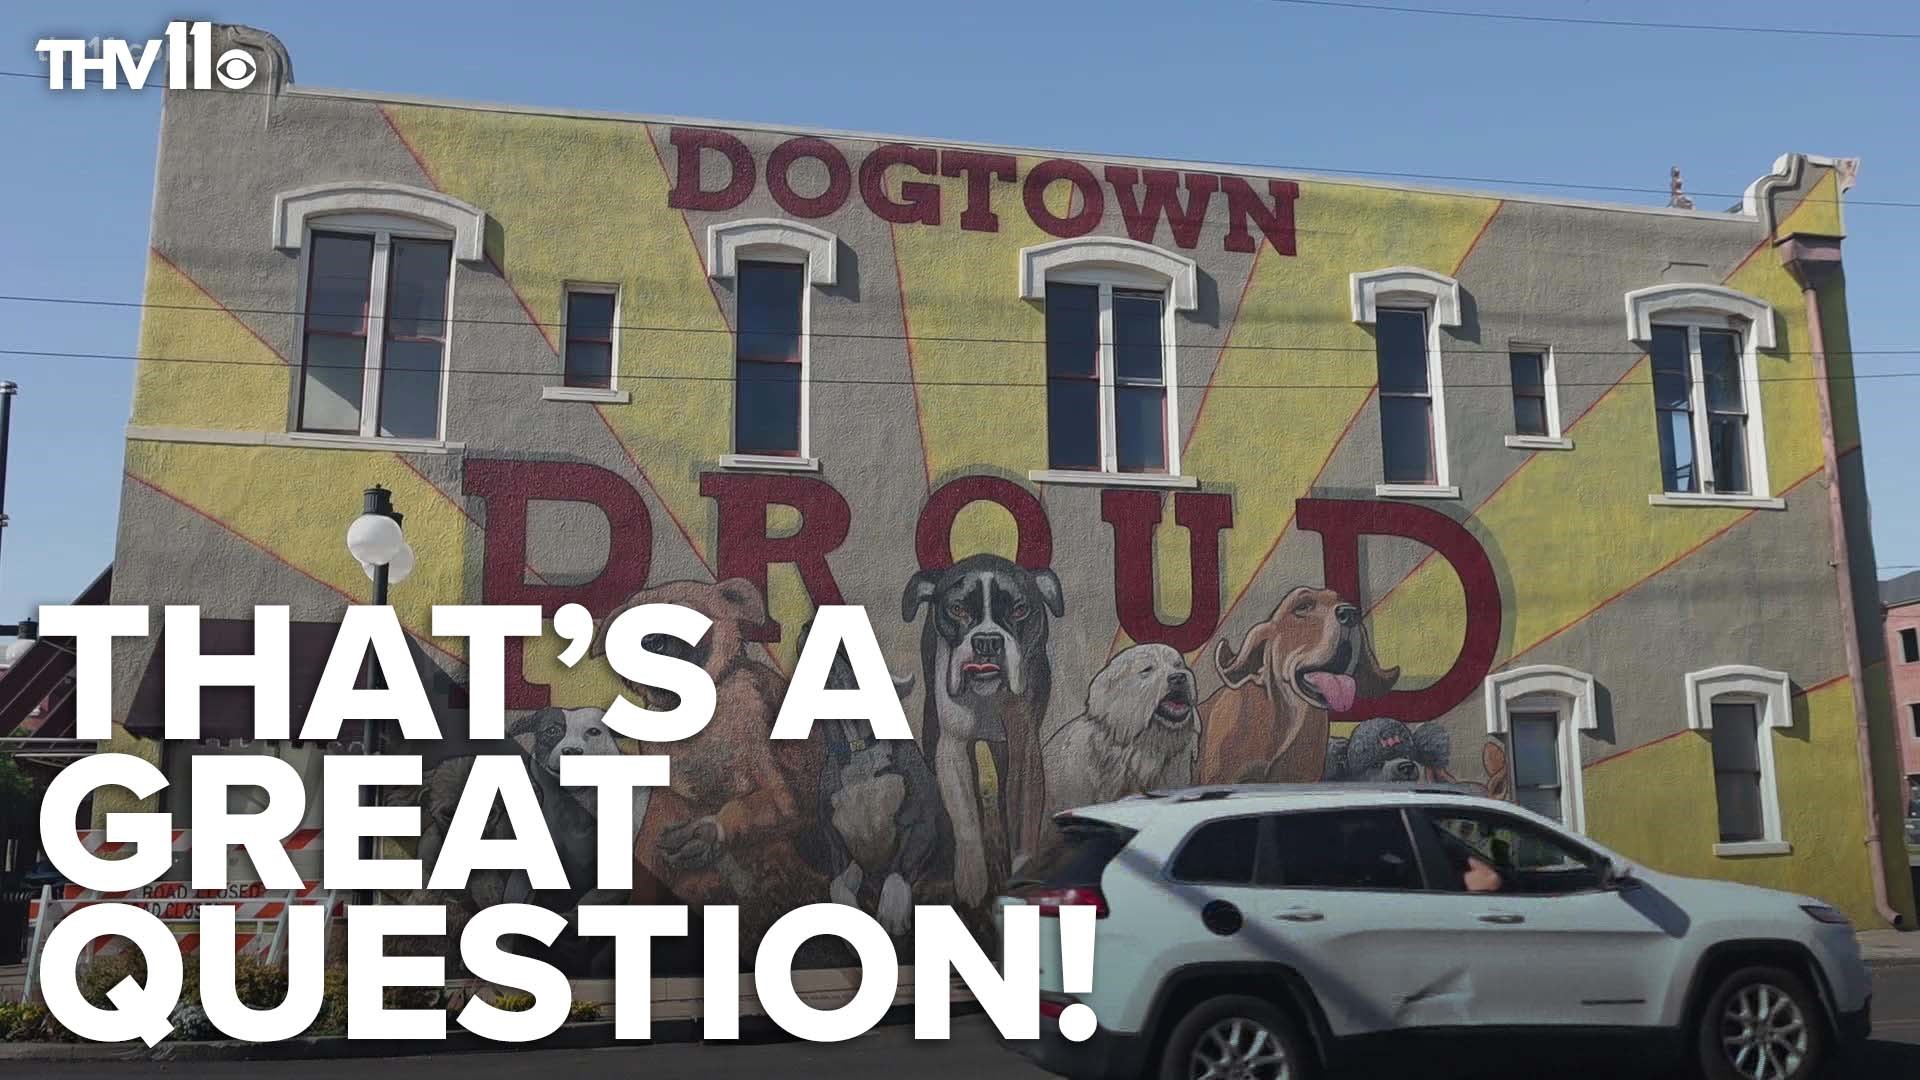 It's hard to miss all of the dog owners when you walk through Argenta, but the city's nickname hasn't always been a good one since receiving it in the 20th century.